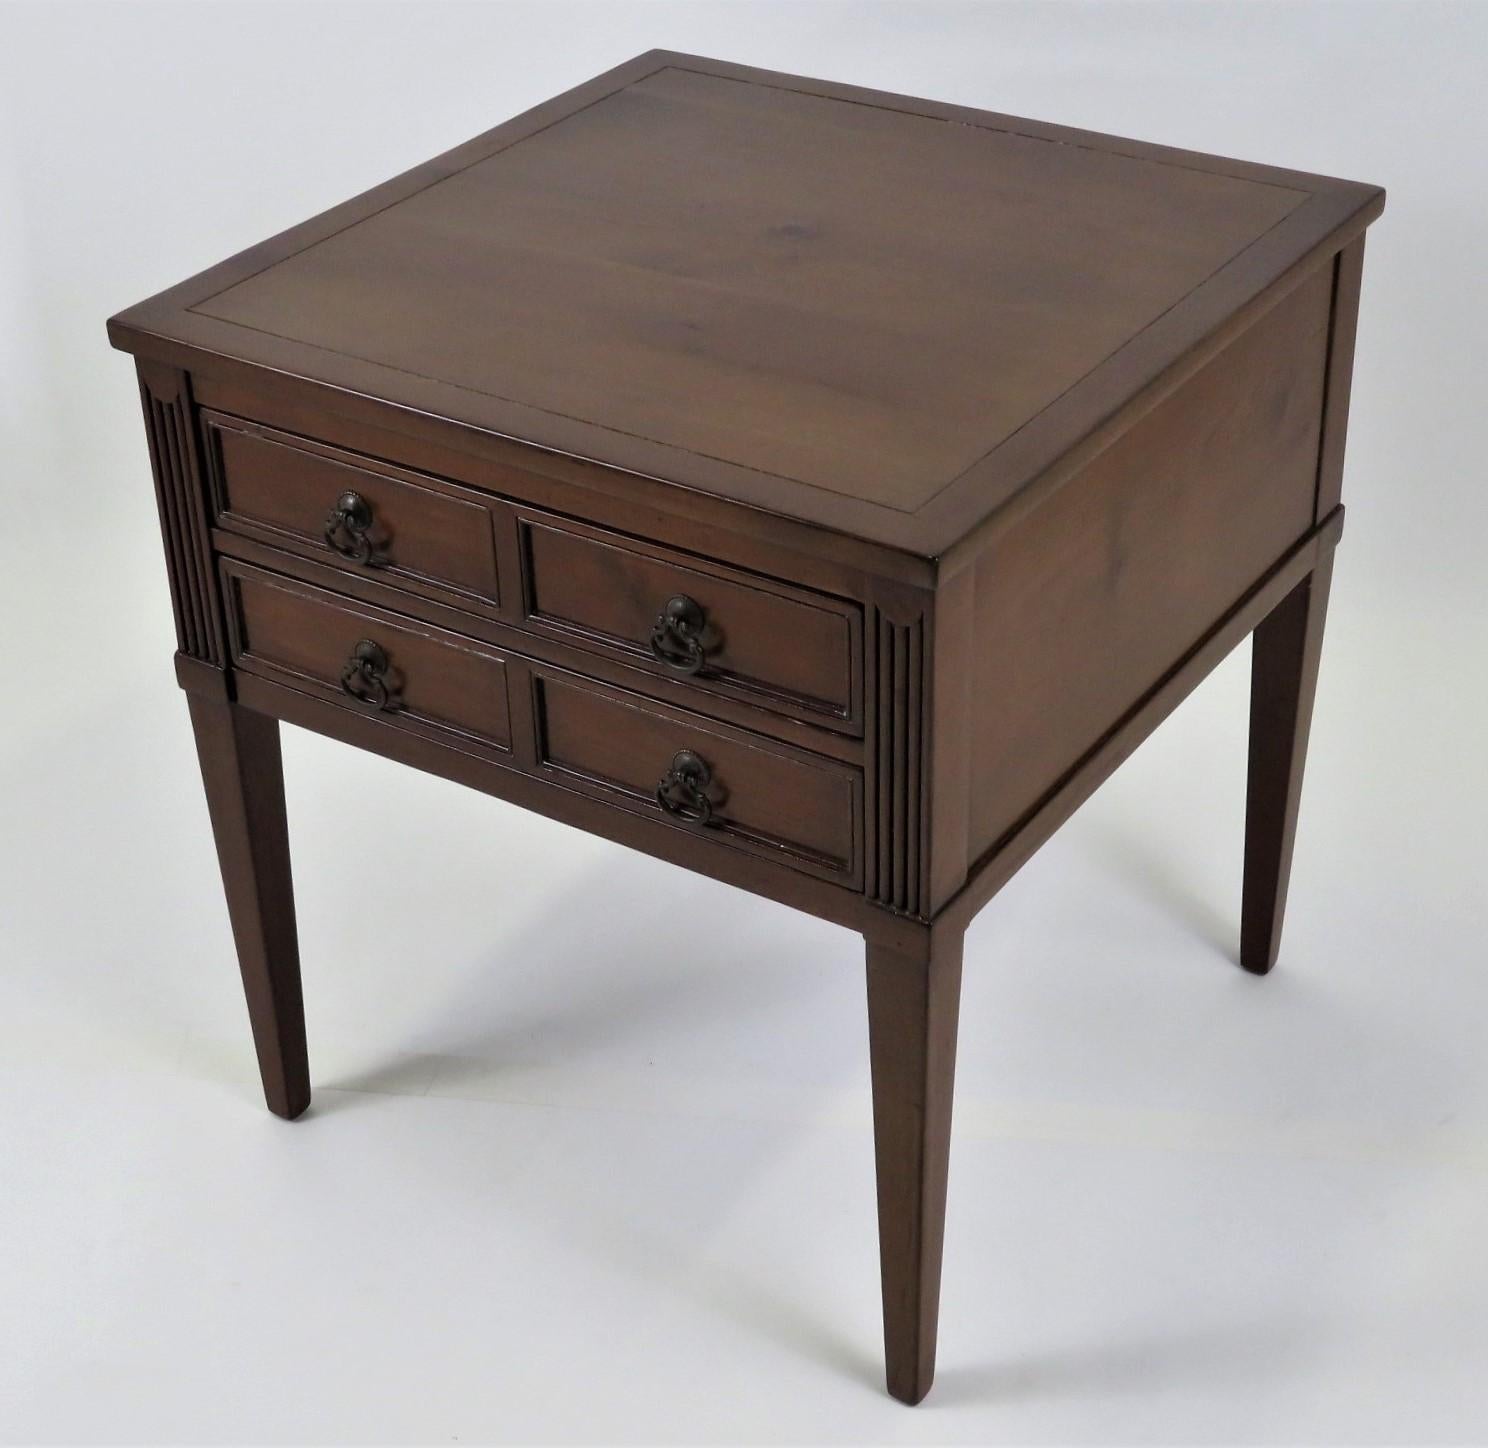 Fine Baker Furniture two drawer transitional style french provincial bedside or end table. With subtle fluted carving on the front drawer side, it has earring drop pulls. A knotty cherry wood is employed to fine use. Restored